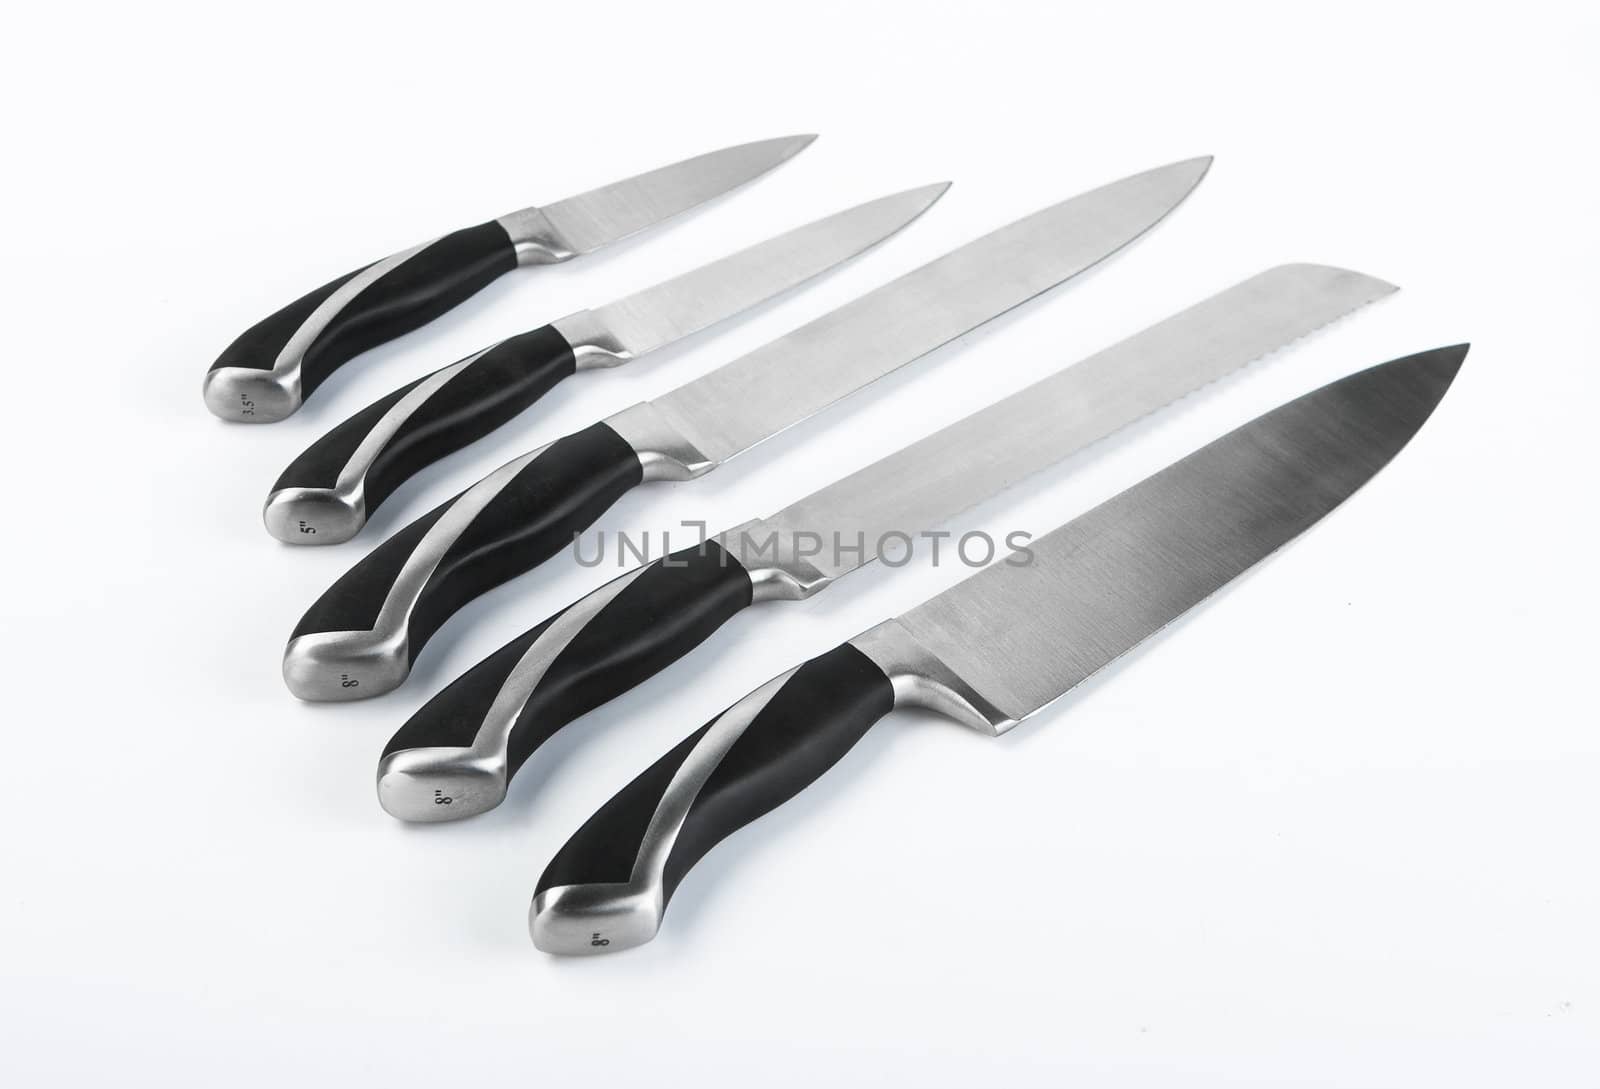 A set of professional chef's knives on a white background